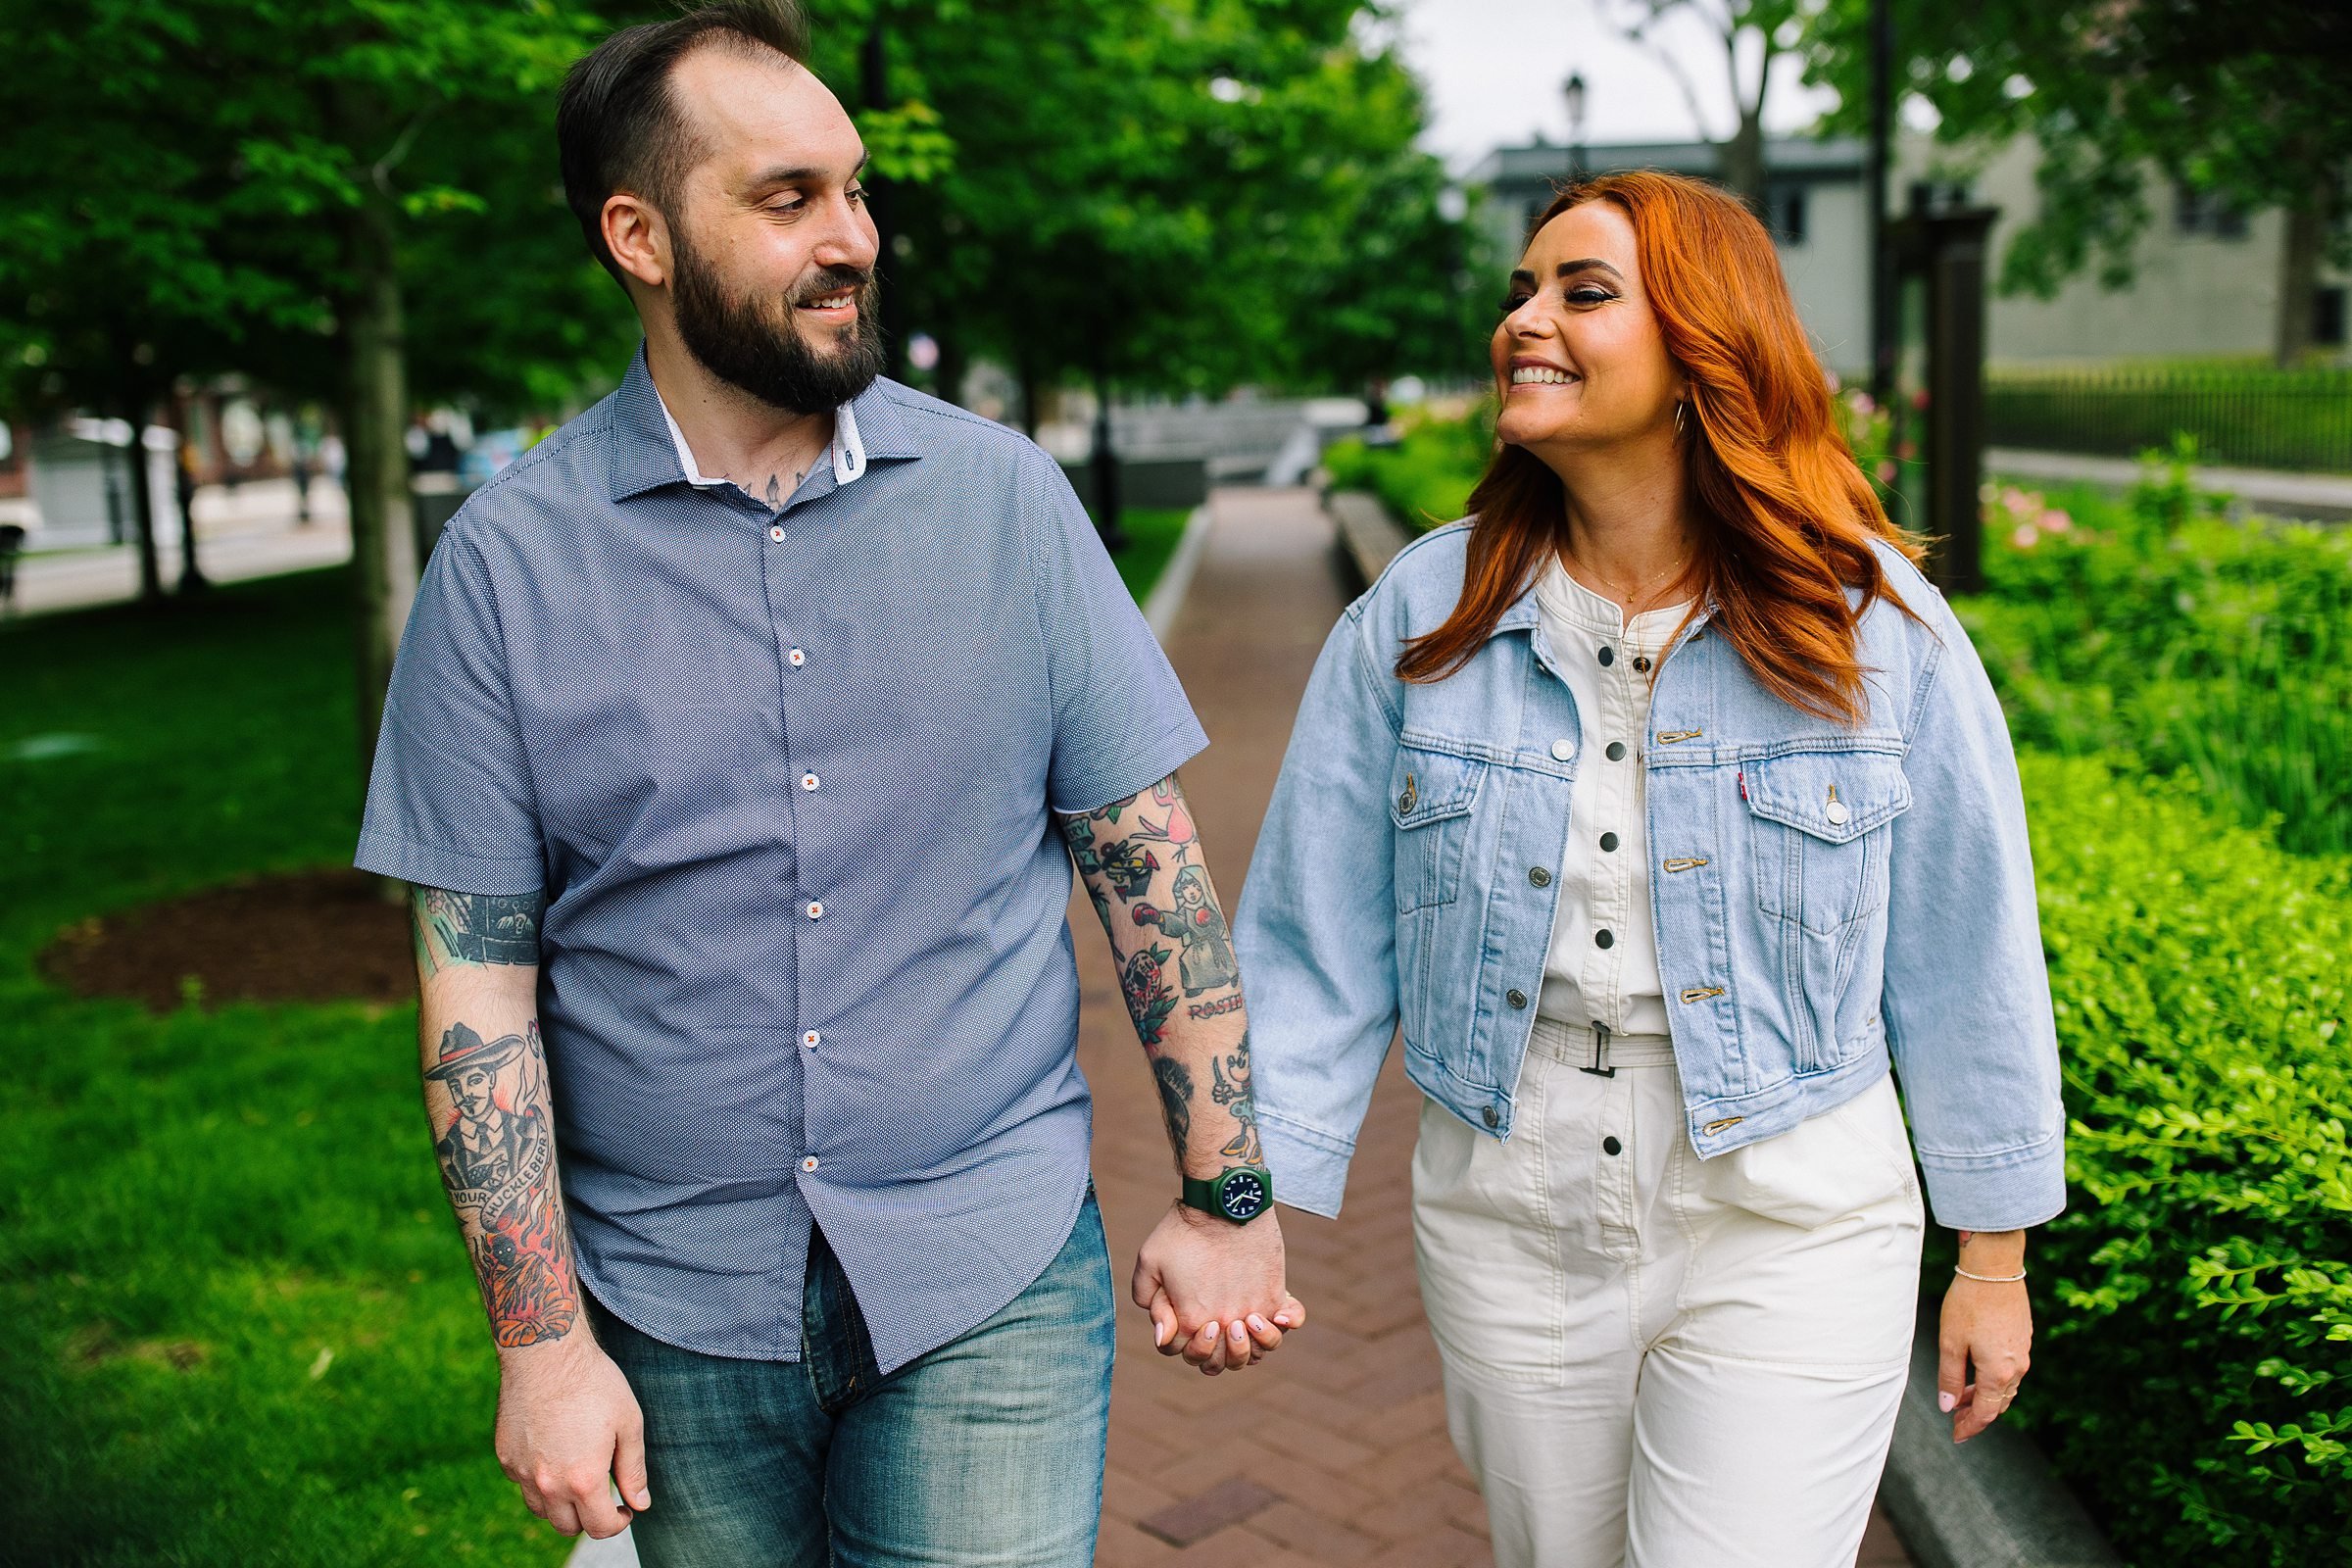 Downtown Orlando Engagement Session06.jpg